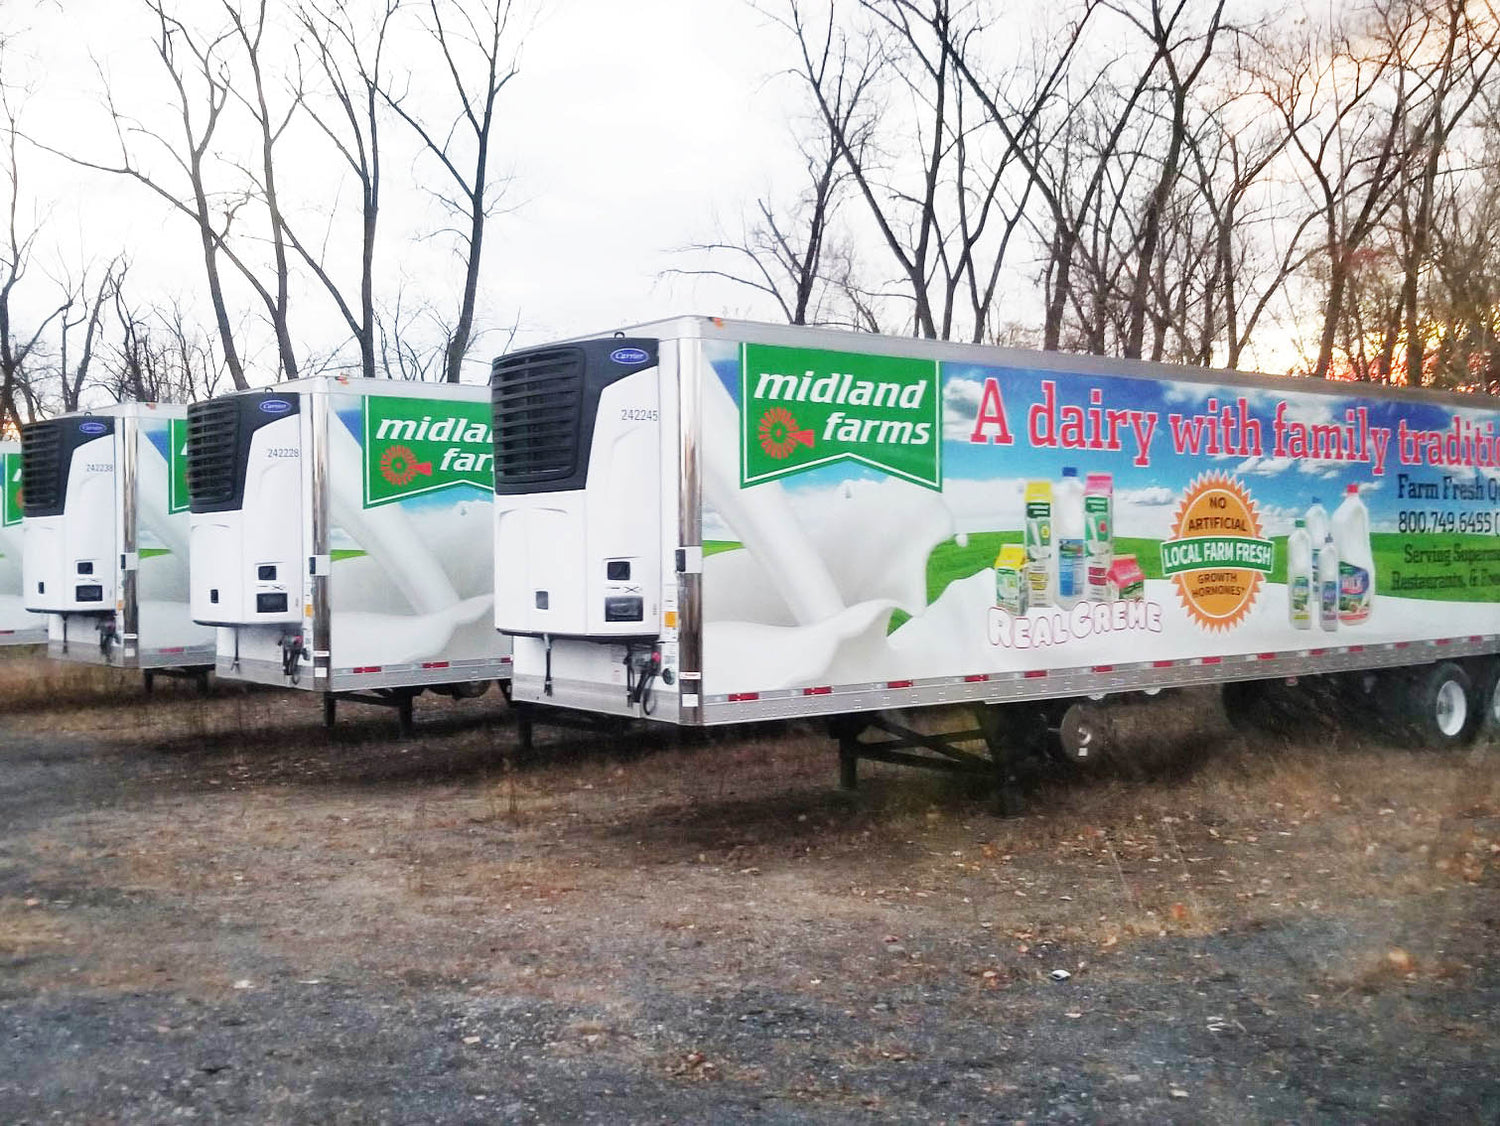 Large fleet of trailer wraps.  Printed and laminated cast vinyl wraps installed by All Signs & Graphics Inc. Design is for Midland Farms dairy products.